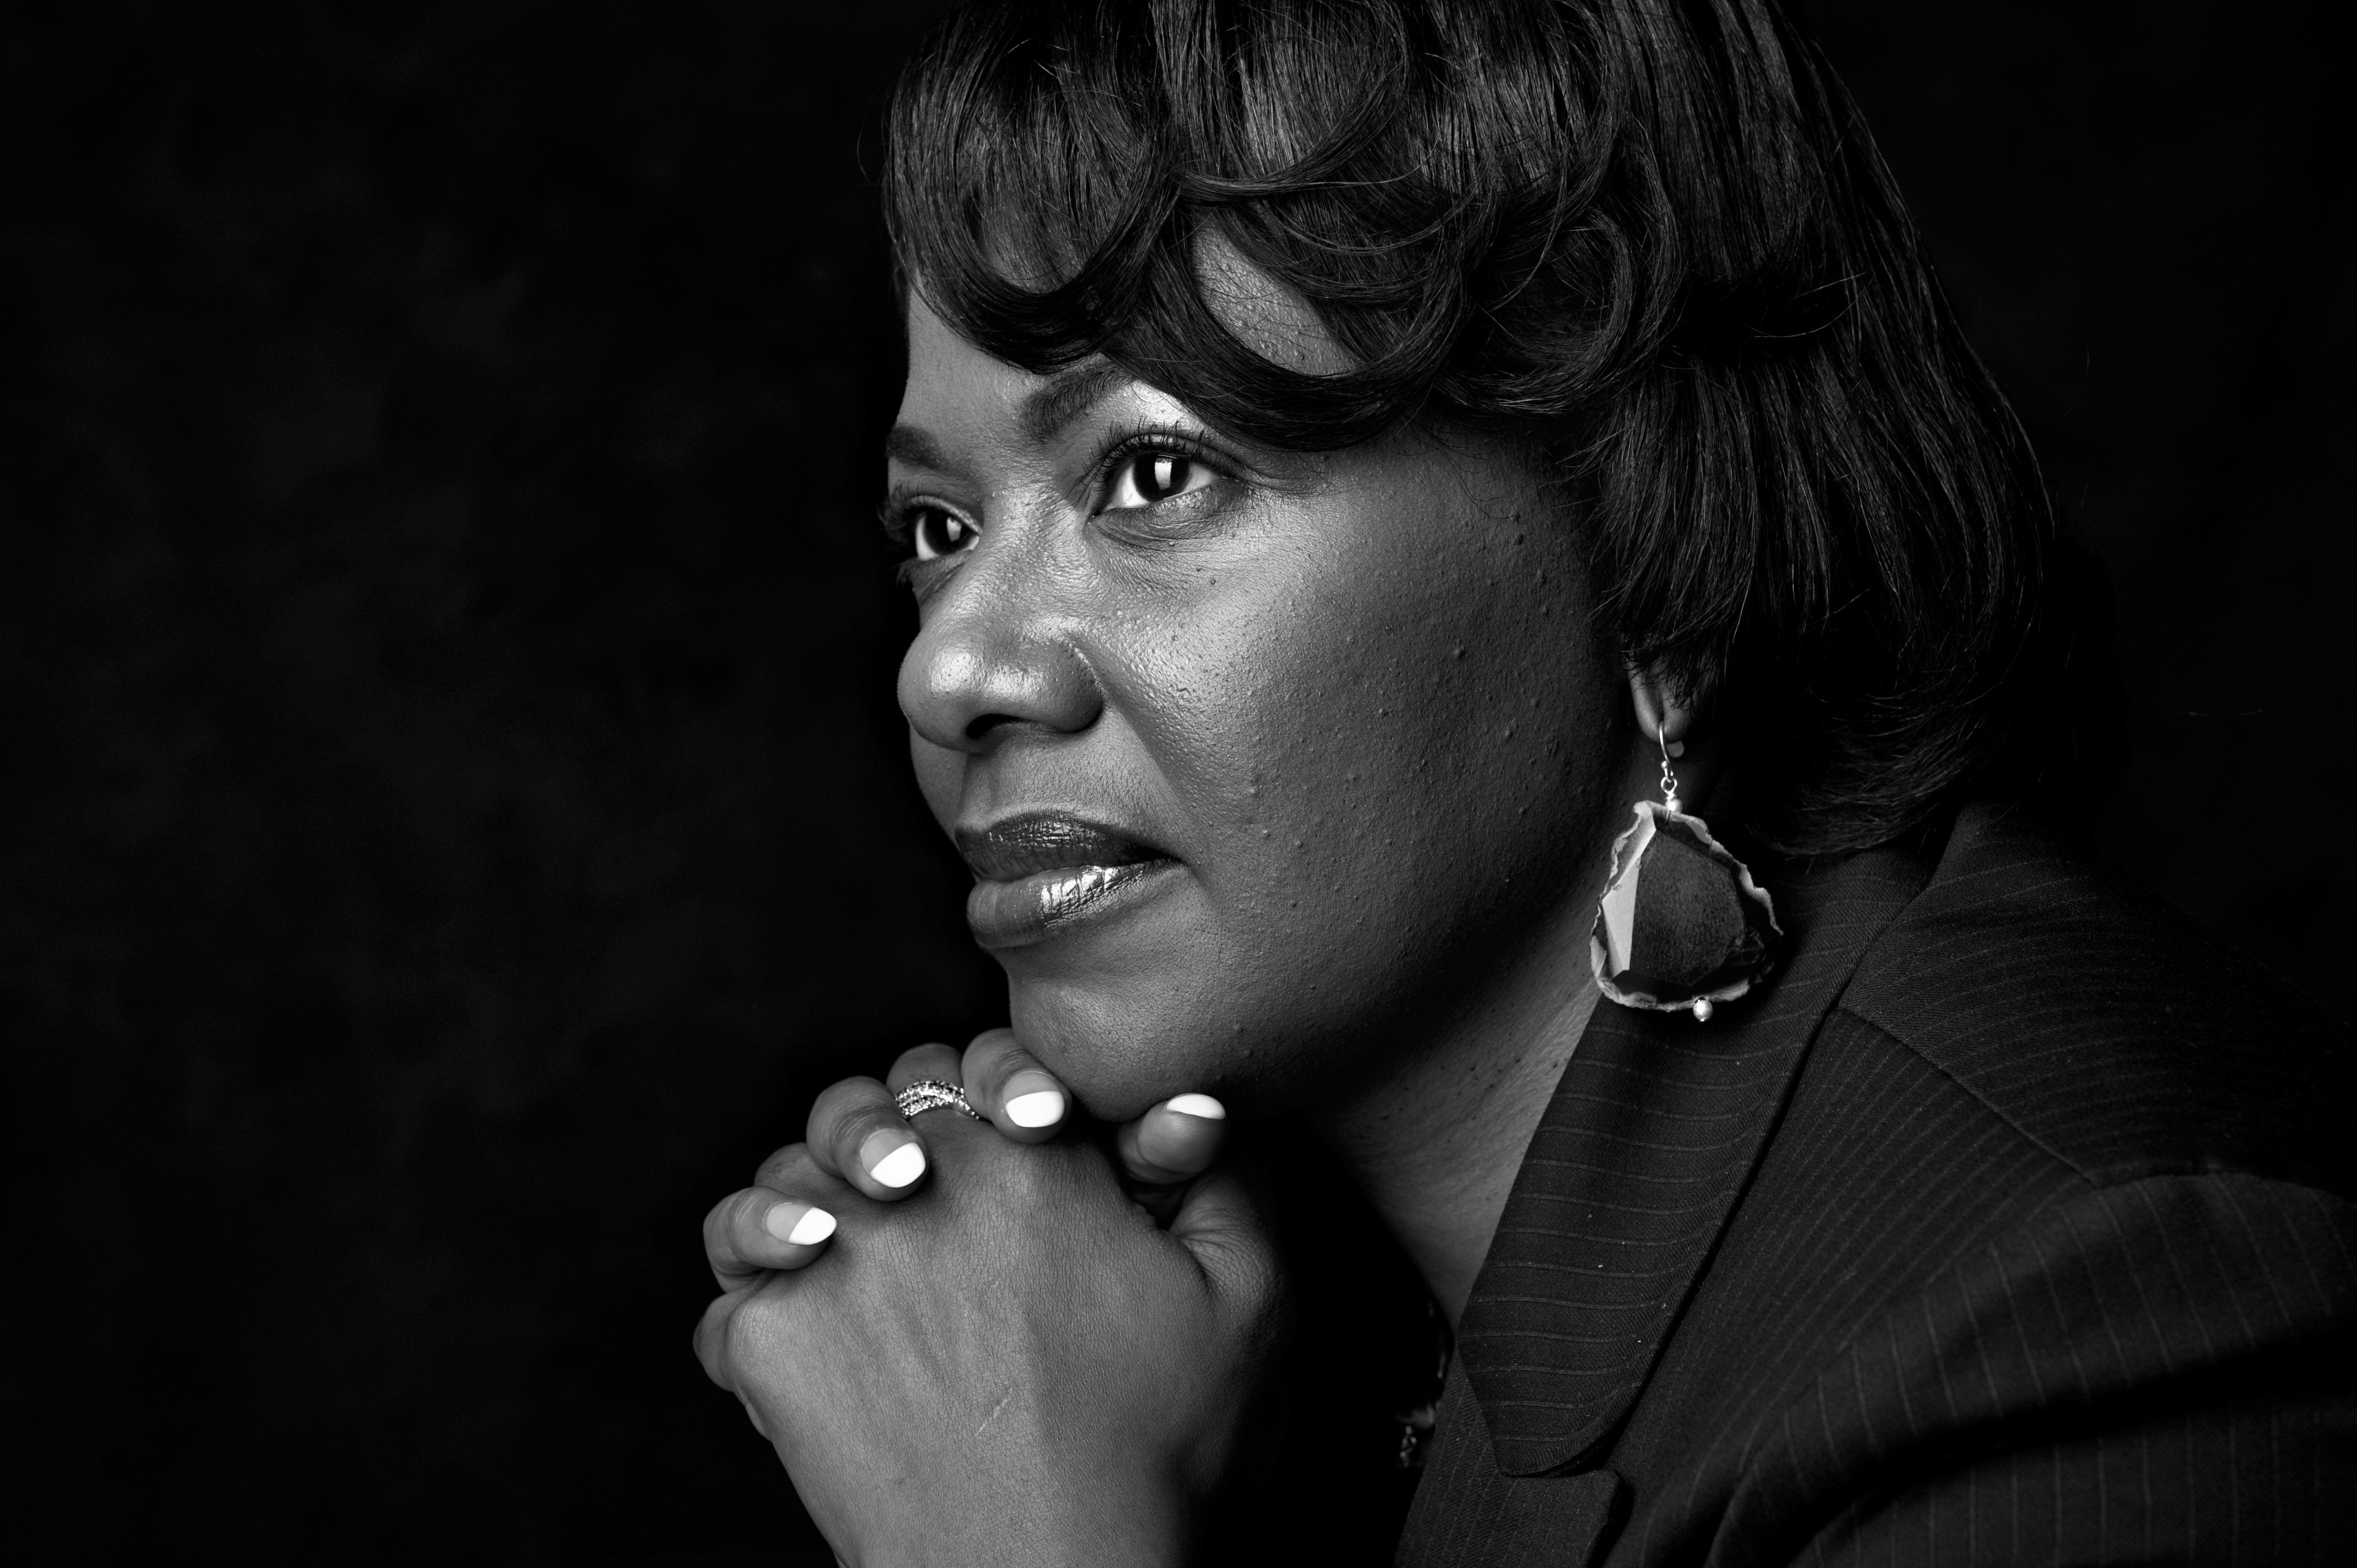 Bernice A. King - Chief Executive Officer - The King Center